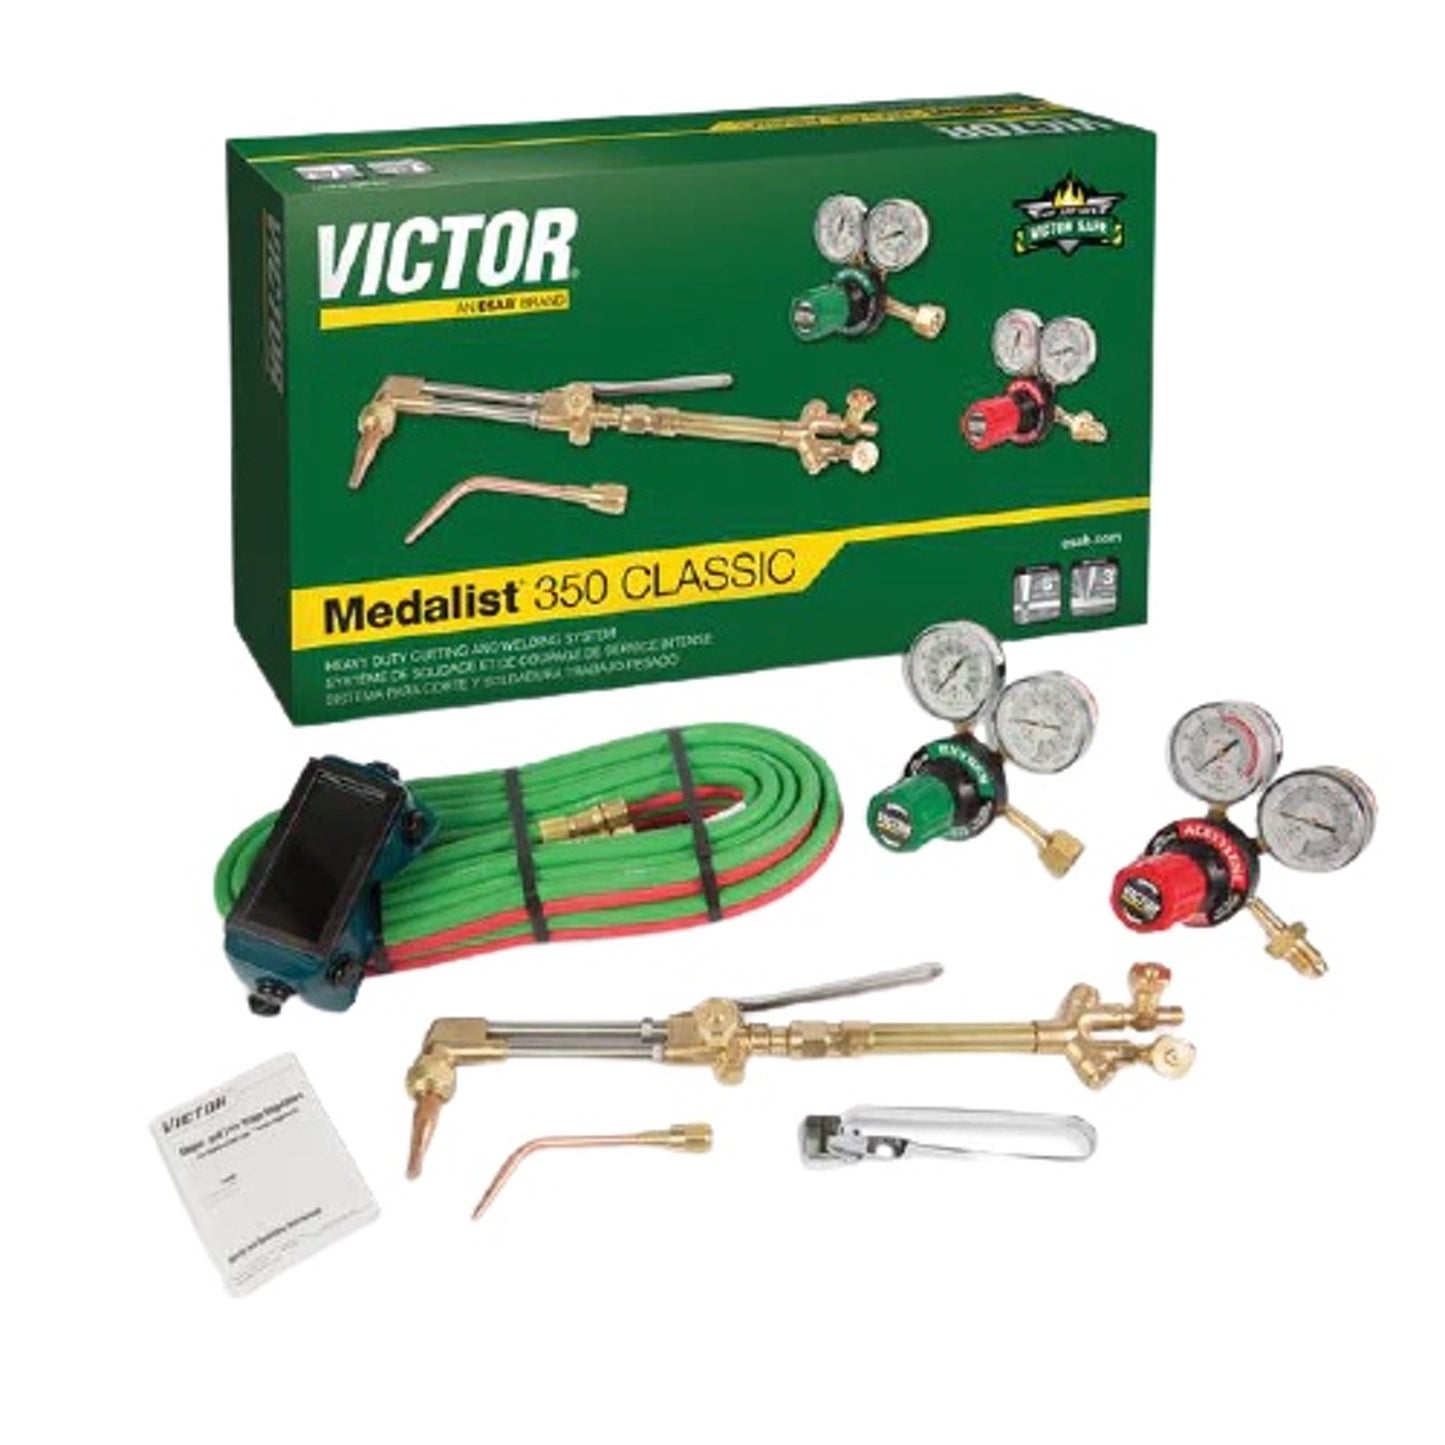 Victor Medalist 350 Classic Heavy Duty